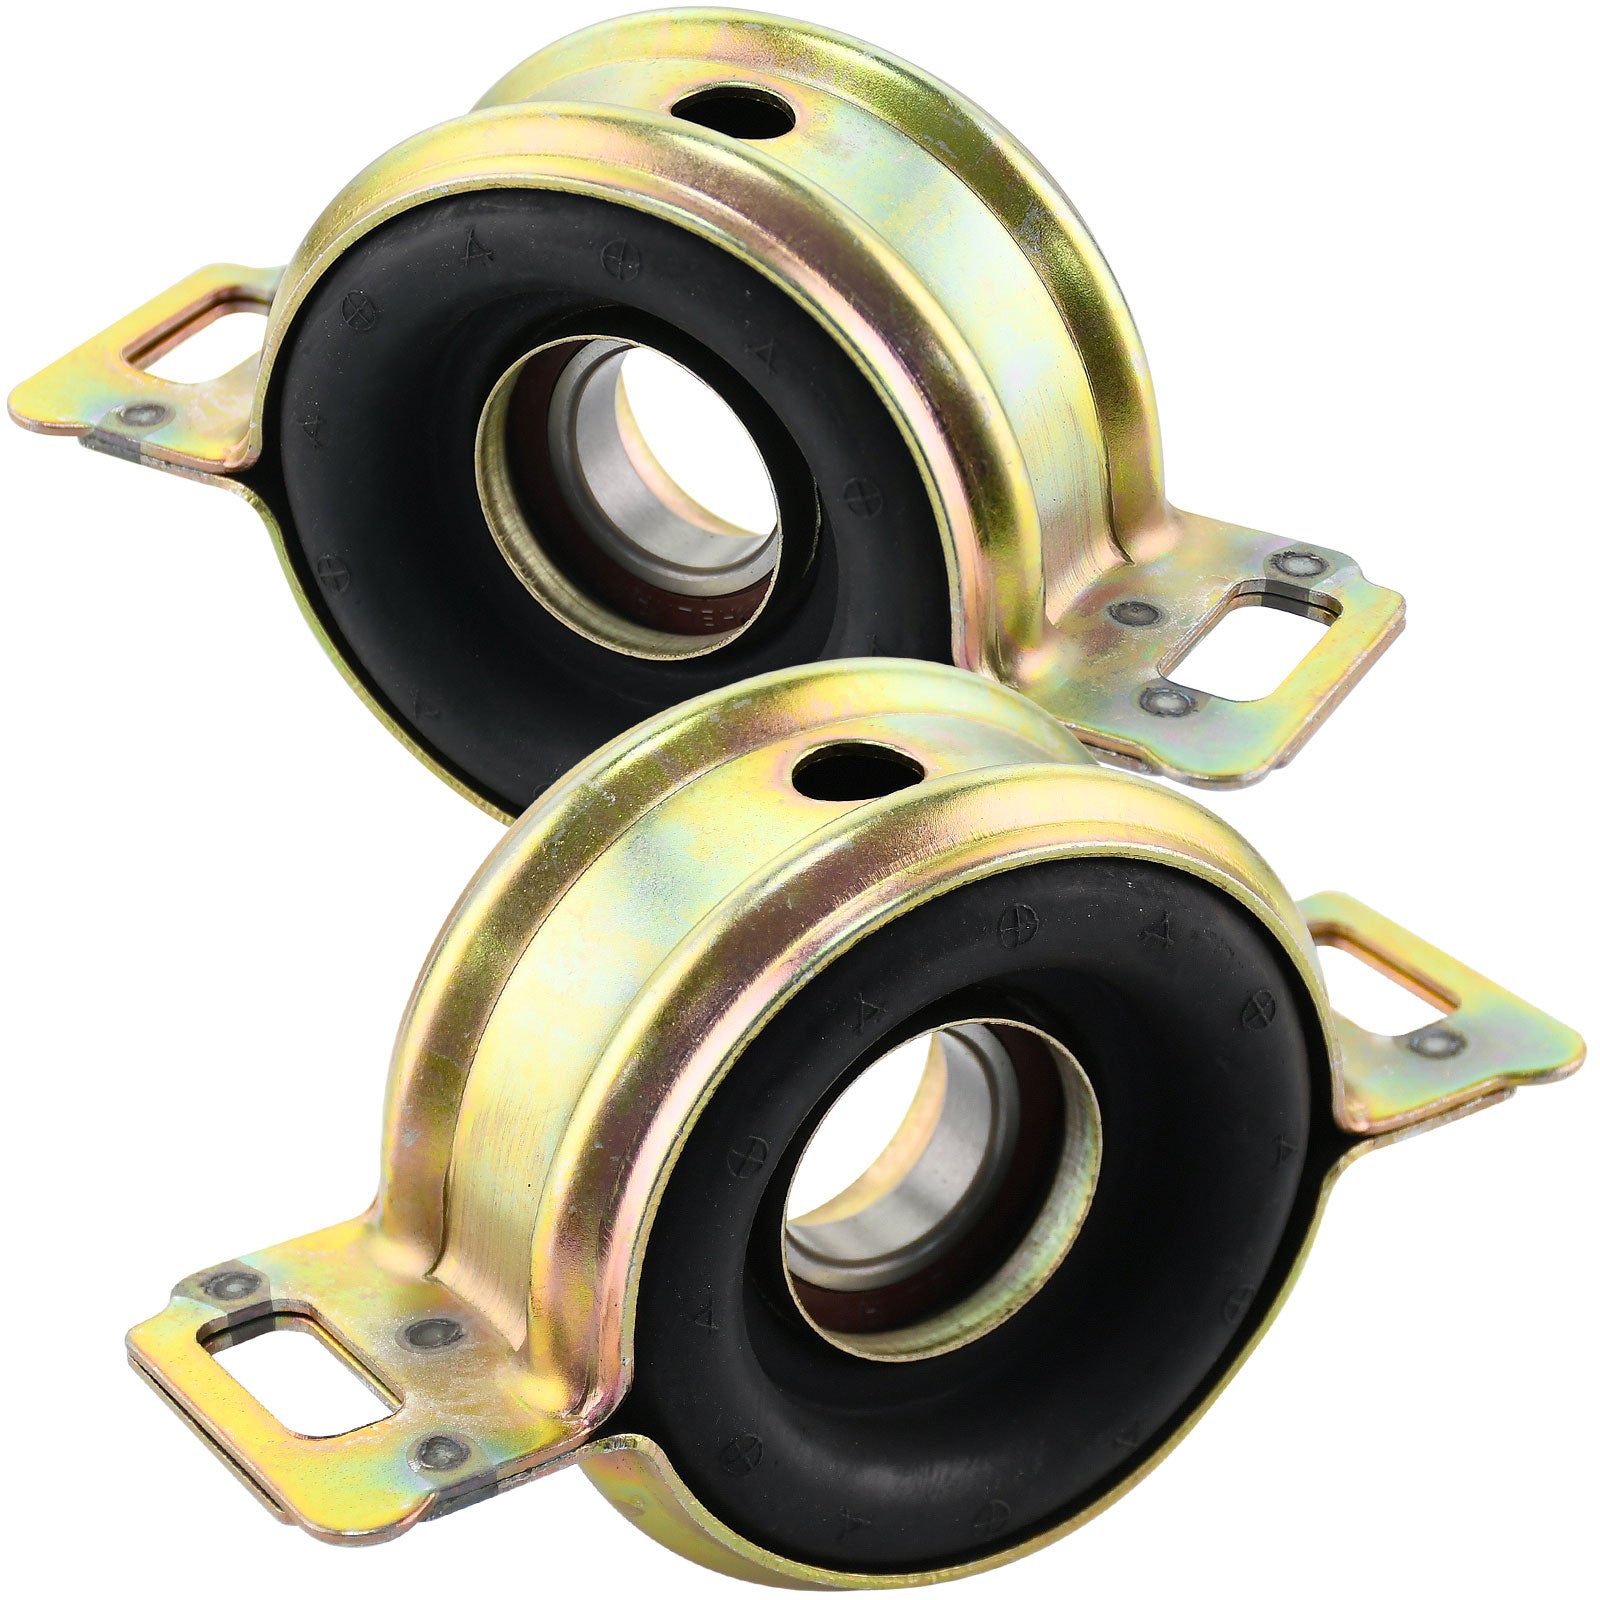 JADODE Driveshaft Center Support Bearing Drive for Toyota Tacoma 1995-2015, Toyota T100 1993-1998, Toyota Tundra 2000-2015-Center Support Assembly 4WD